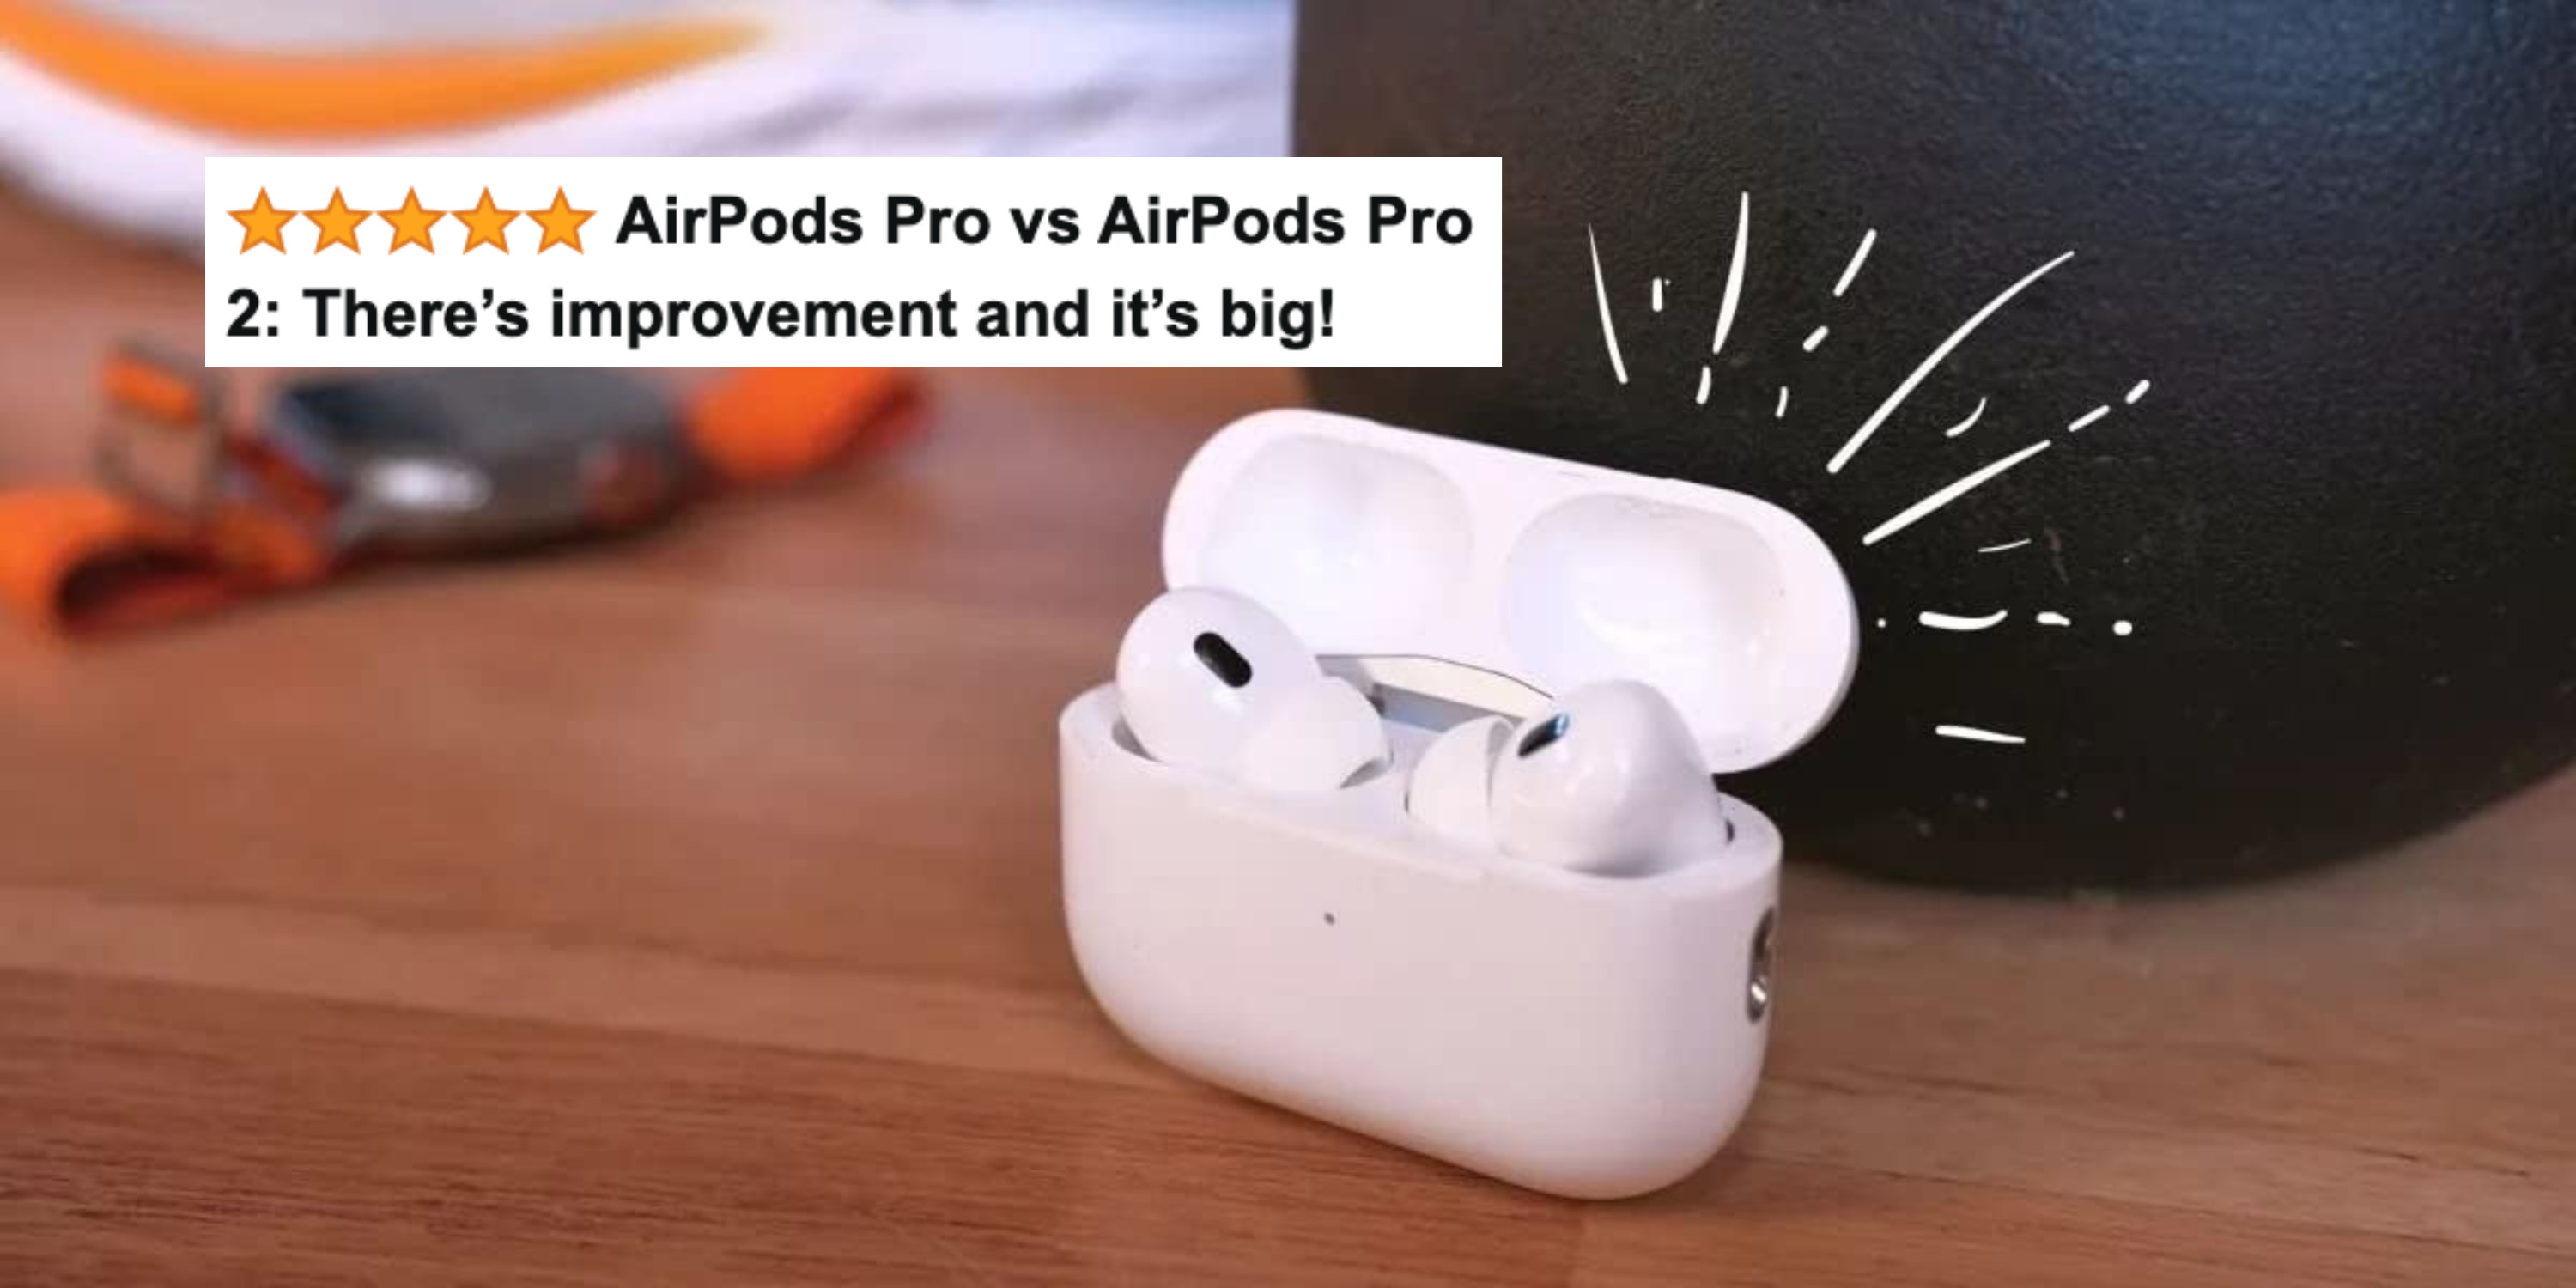 A reviewer&#x27;s airpods with five-star review text &quot;airpods pro vs airpods pro 2: there&#x27;s improvement and it&#x27;s big!&quot;